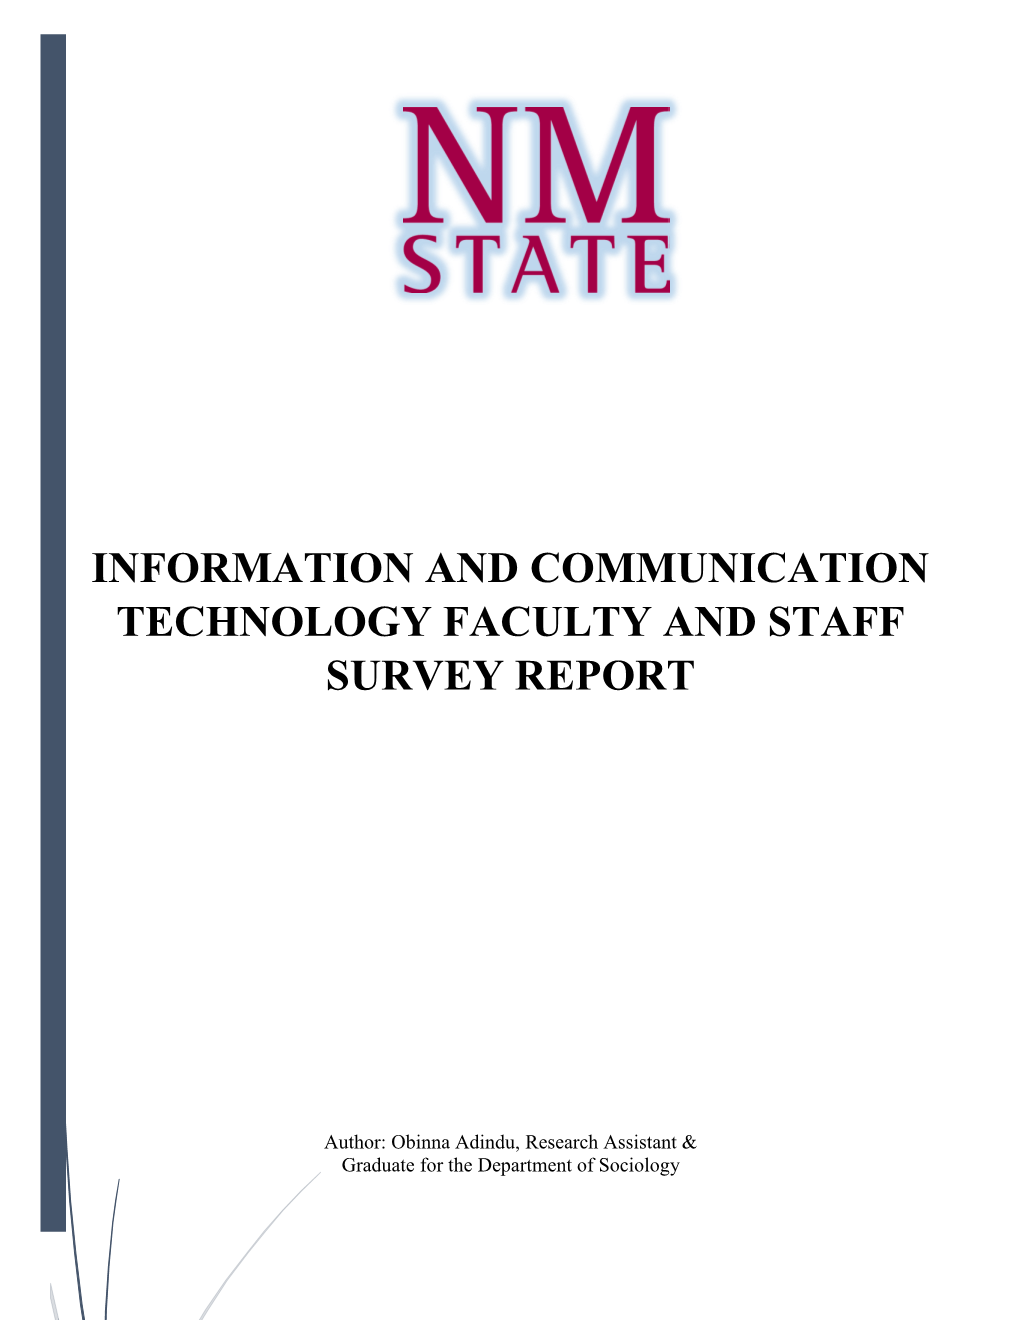 Information and Communication Technology Faculty and Staff Survey